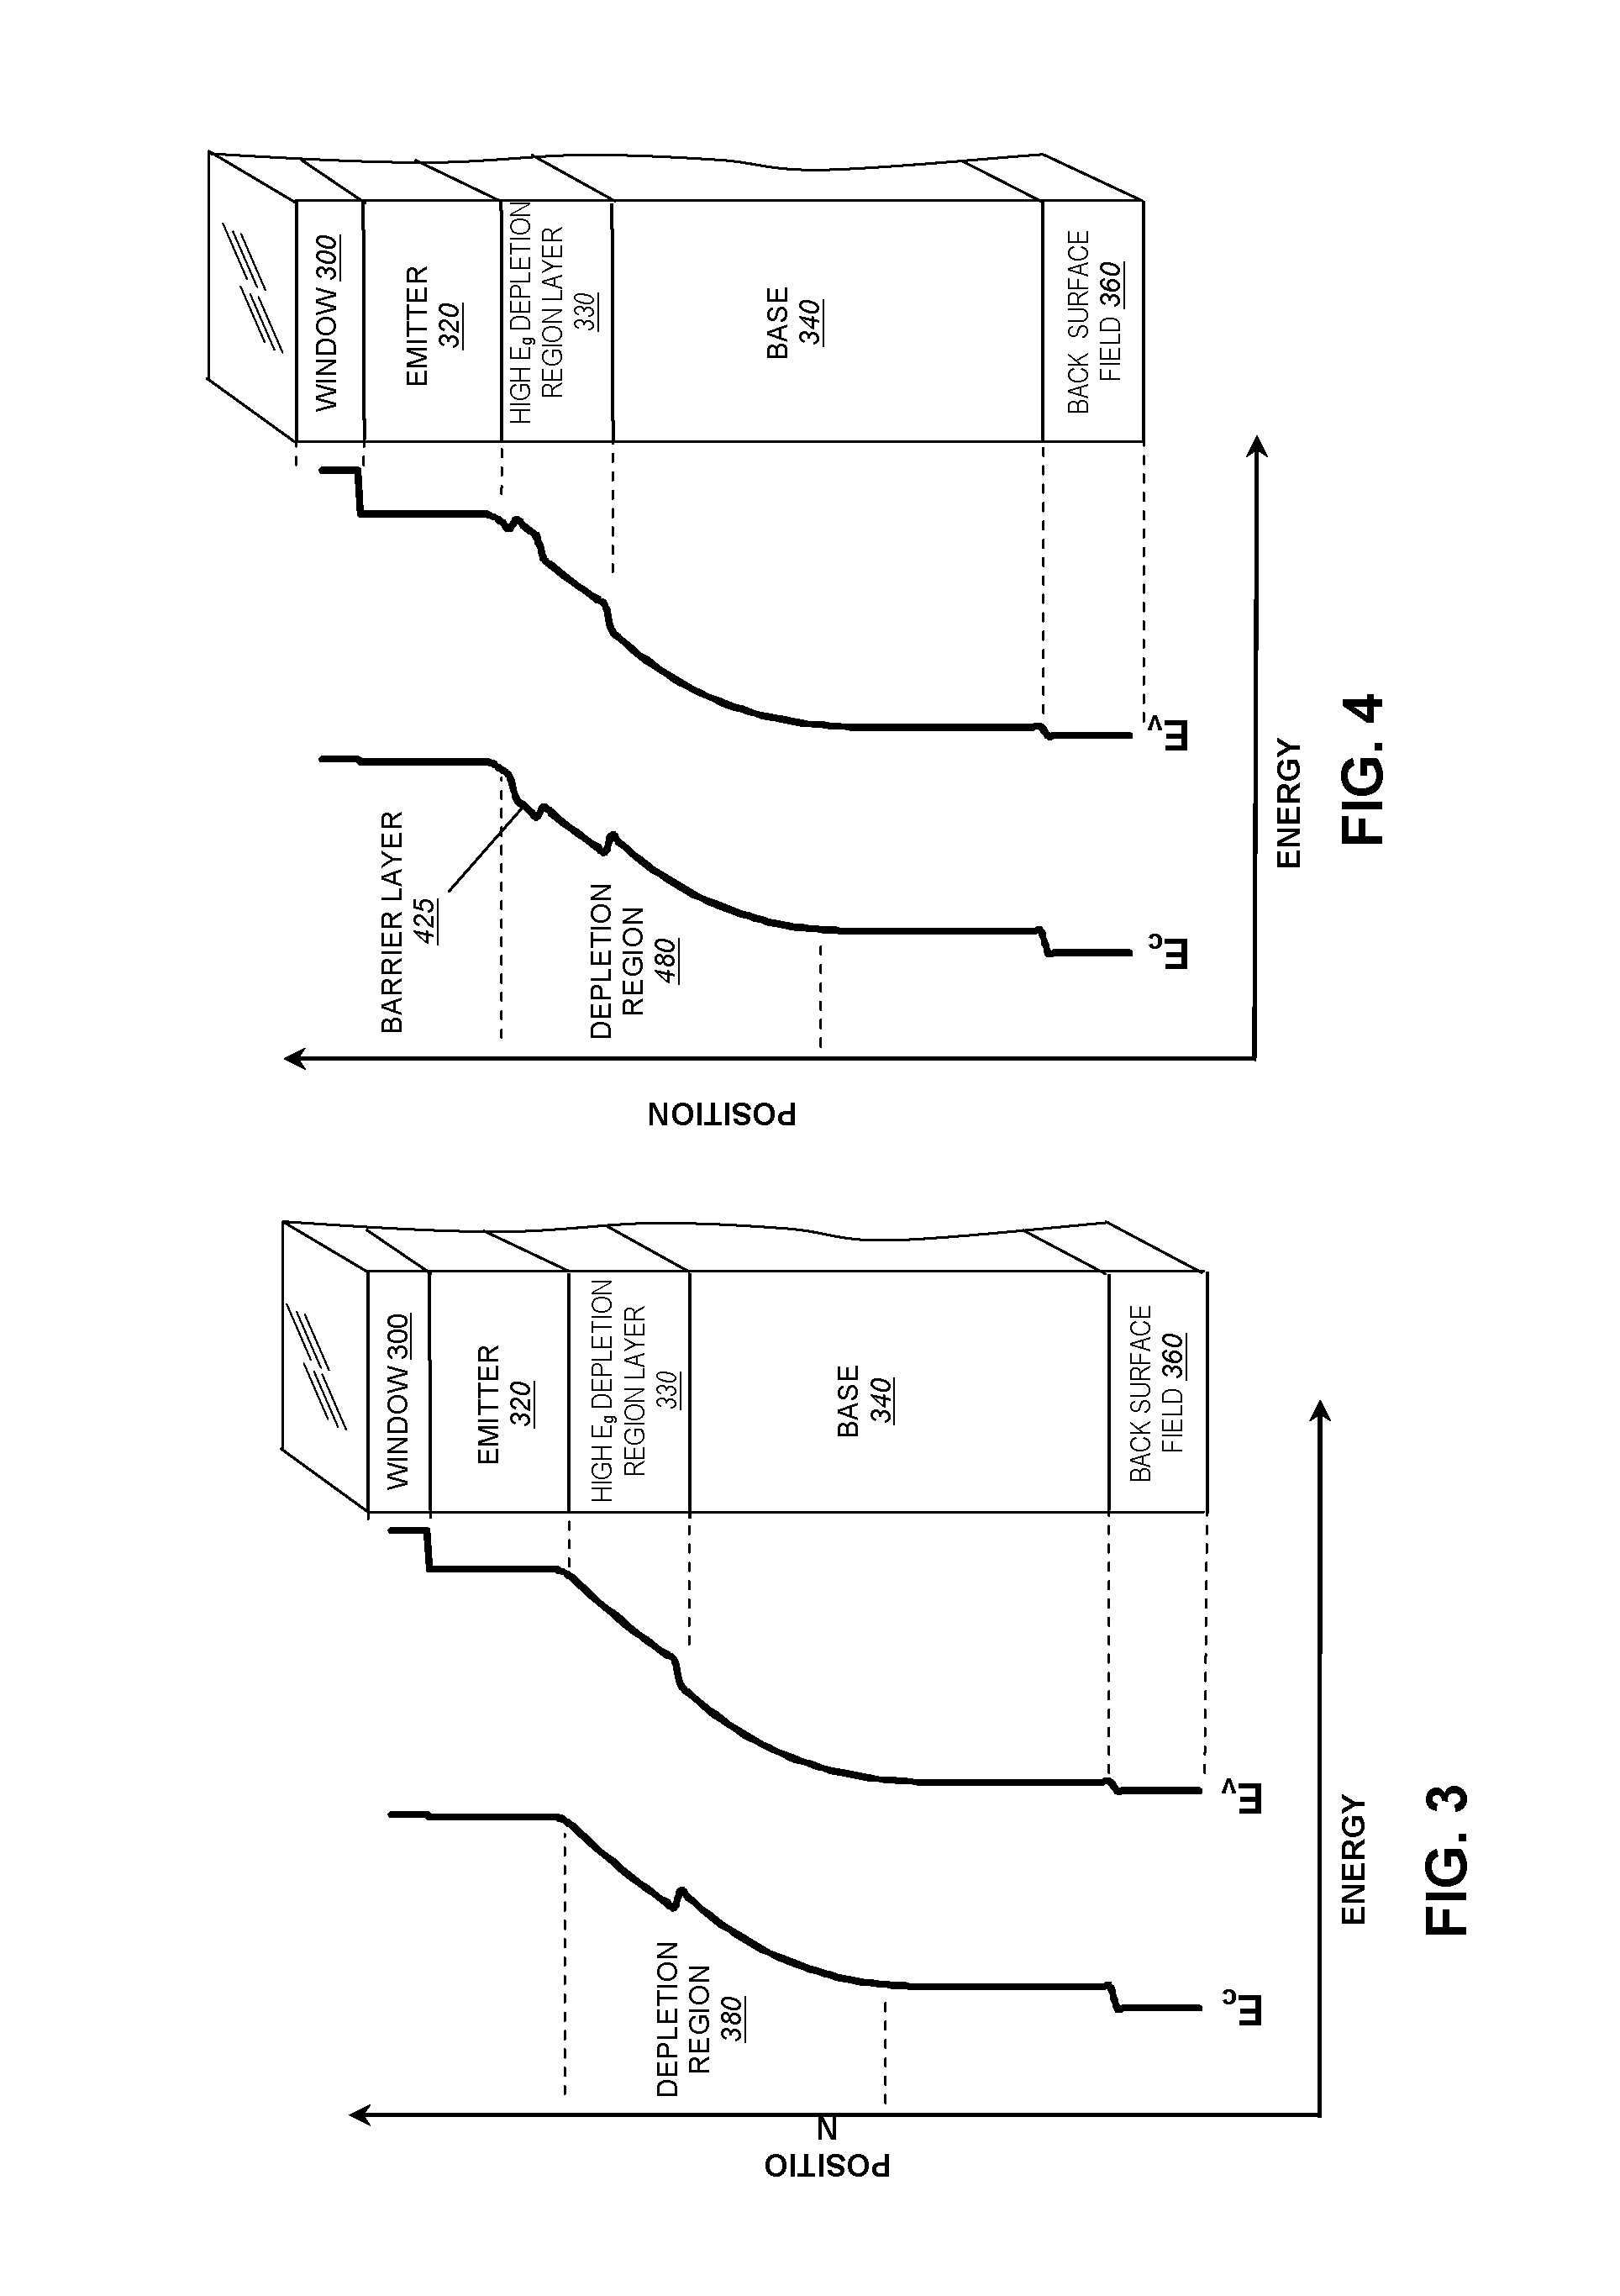 Multijunction solar cell employing extended heterojunction and step graded antireflection structures and methods for constructing the same